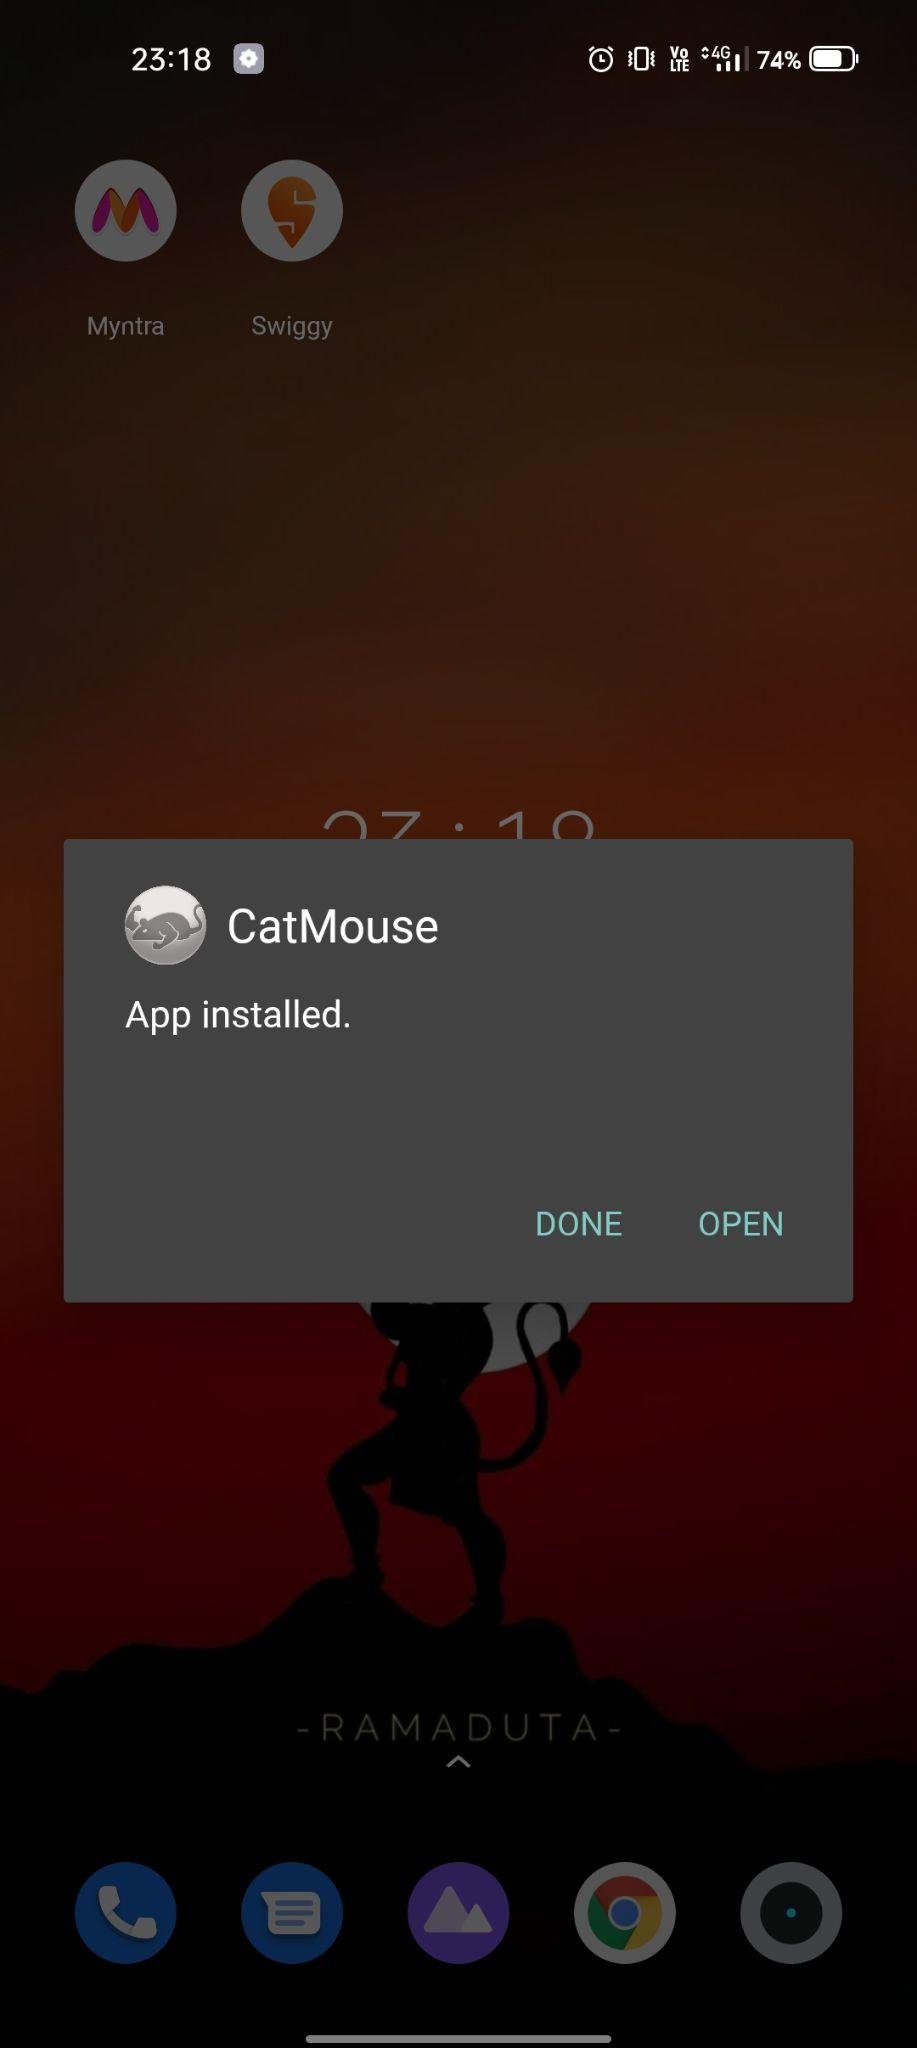 catmouse apk installed